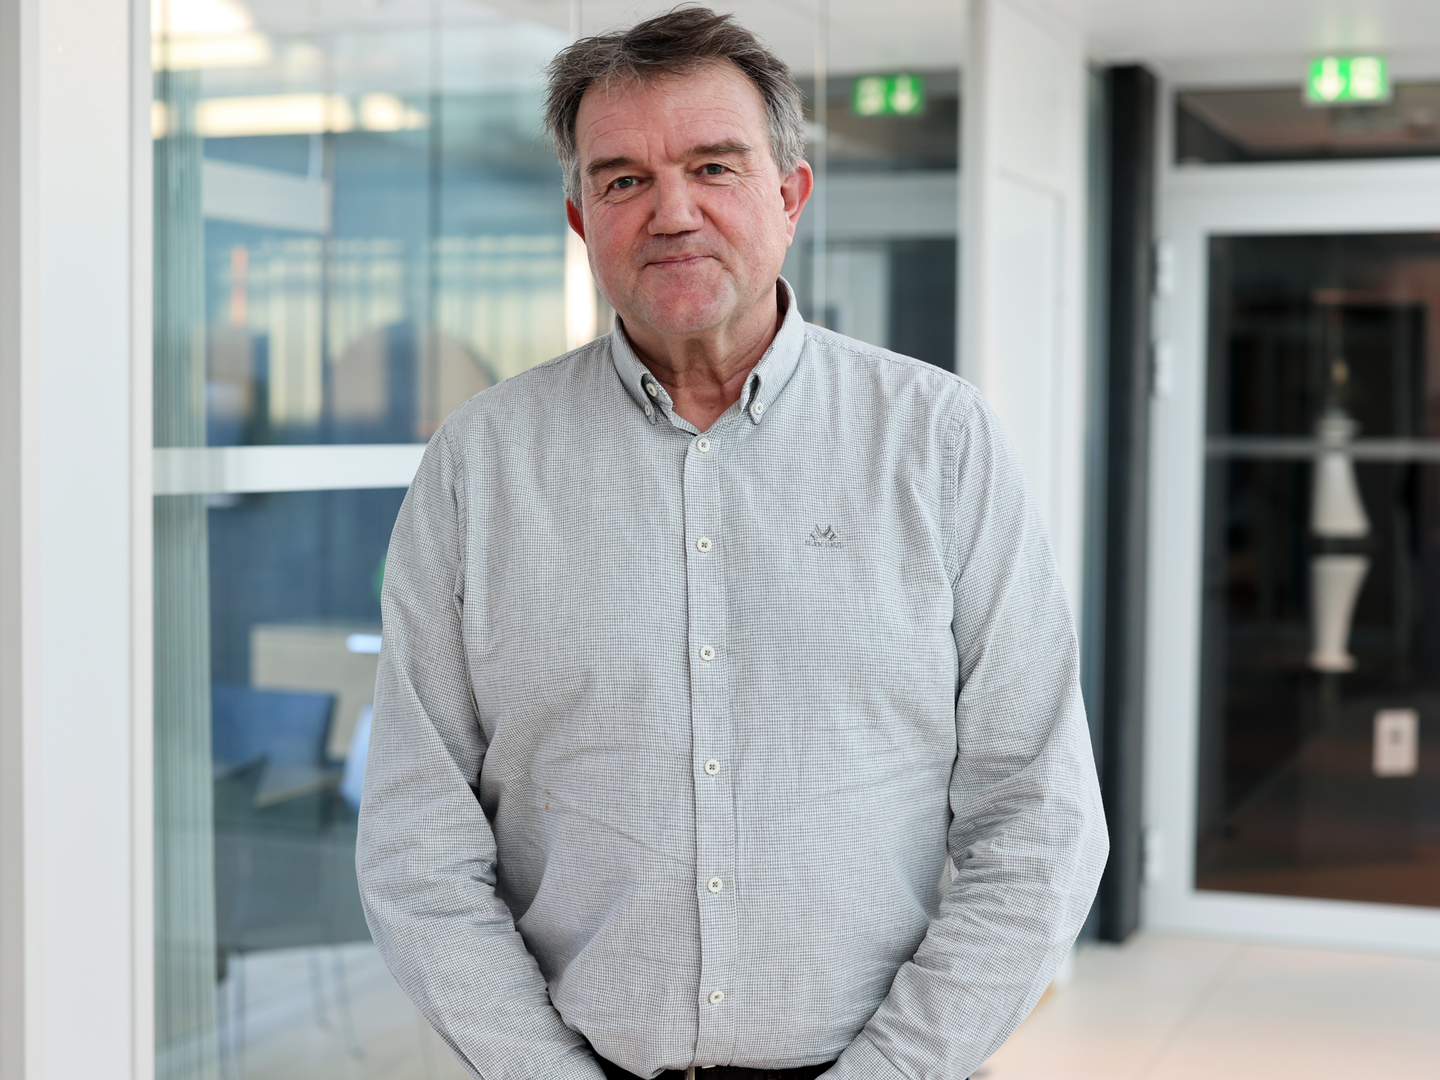 37 YEARS OF EXPERIENCE: Smedbold is Regional Director for Statkraft in Northern Norway until 1 April. He has been with the company since 1987. | Photo: Privat